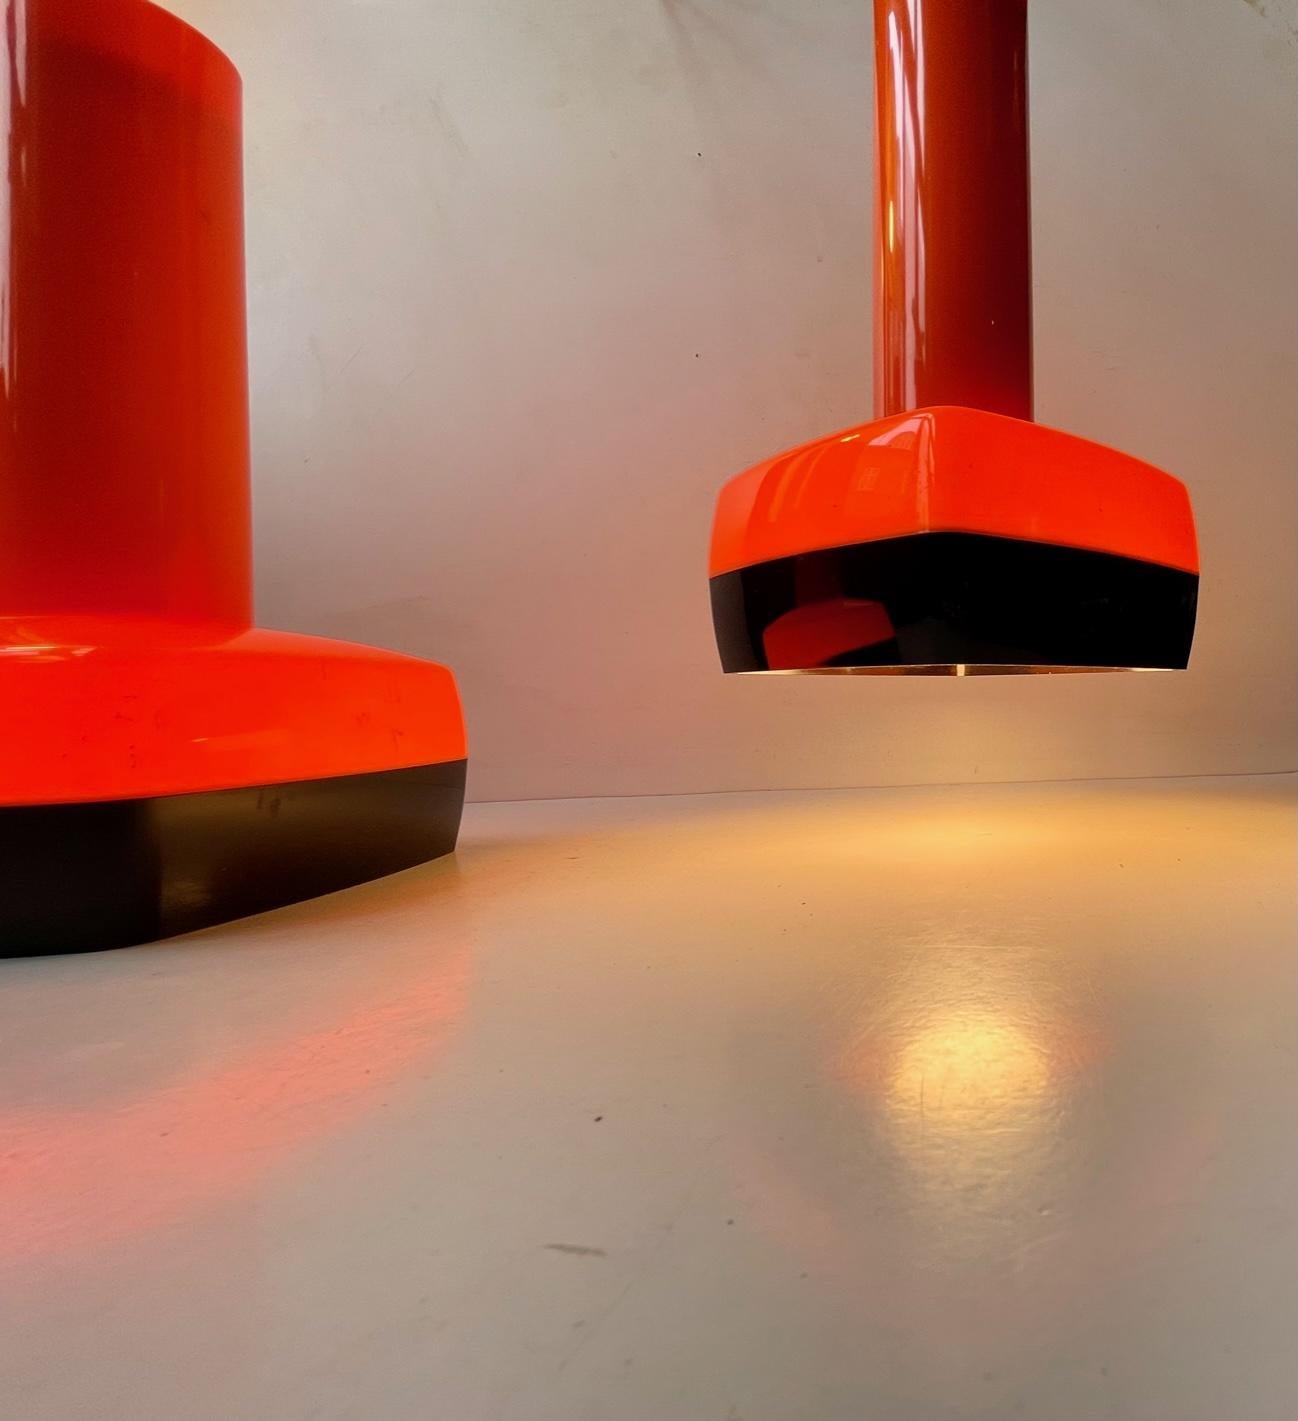 Acid - lava orange and black acrylic pendant lamps designed by Bent Karlby and manufactured by Ask Belysninger (A. Schrøder Kemi) in the 1970s in Denmark. A very rare and very wellkept pair. Measurements: H: 27 cm, W/D: 14 cm. The price is for the